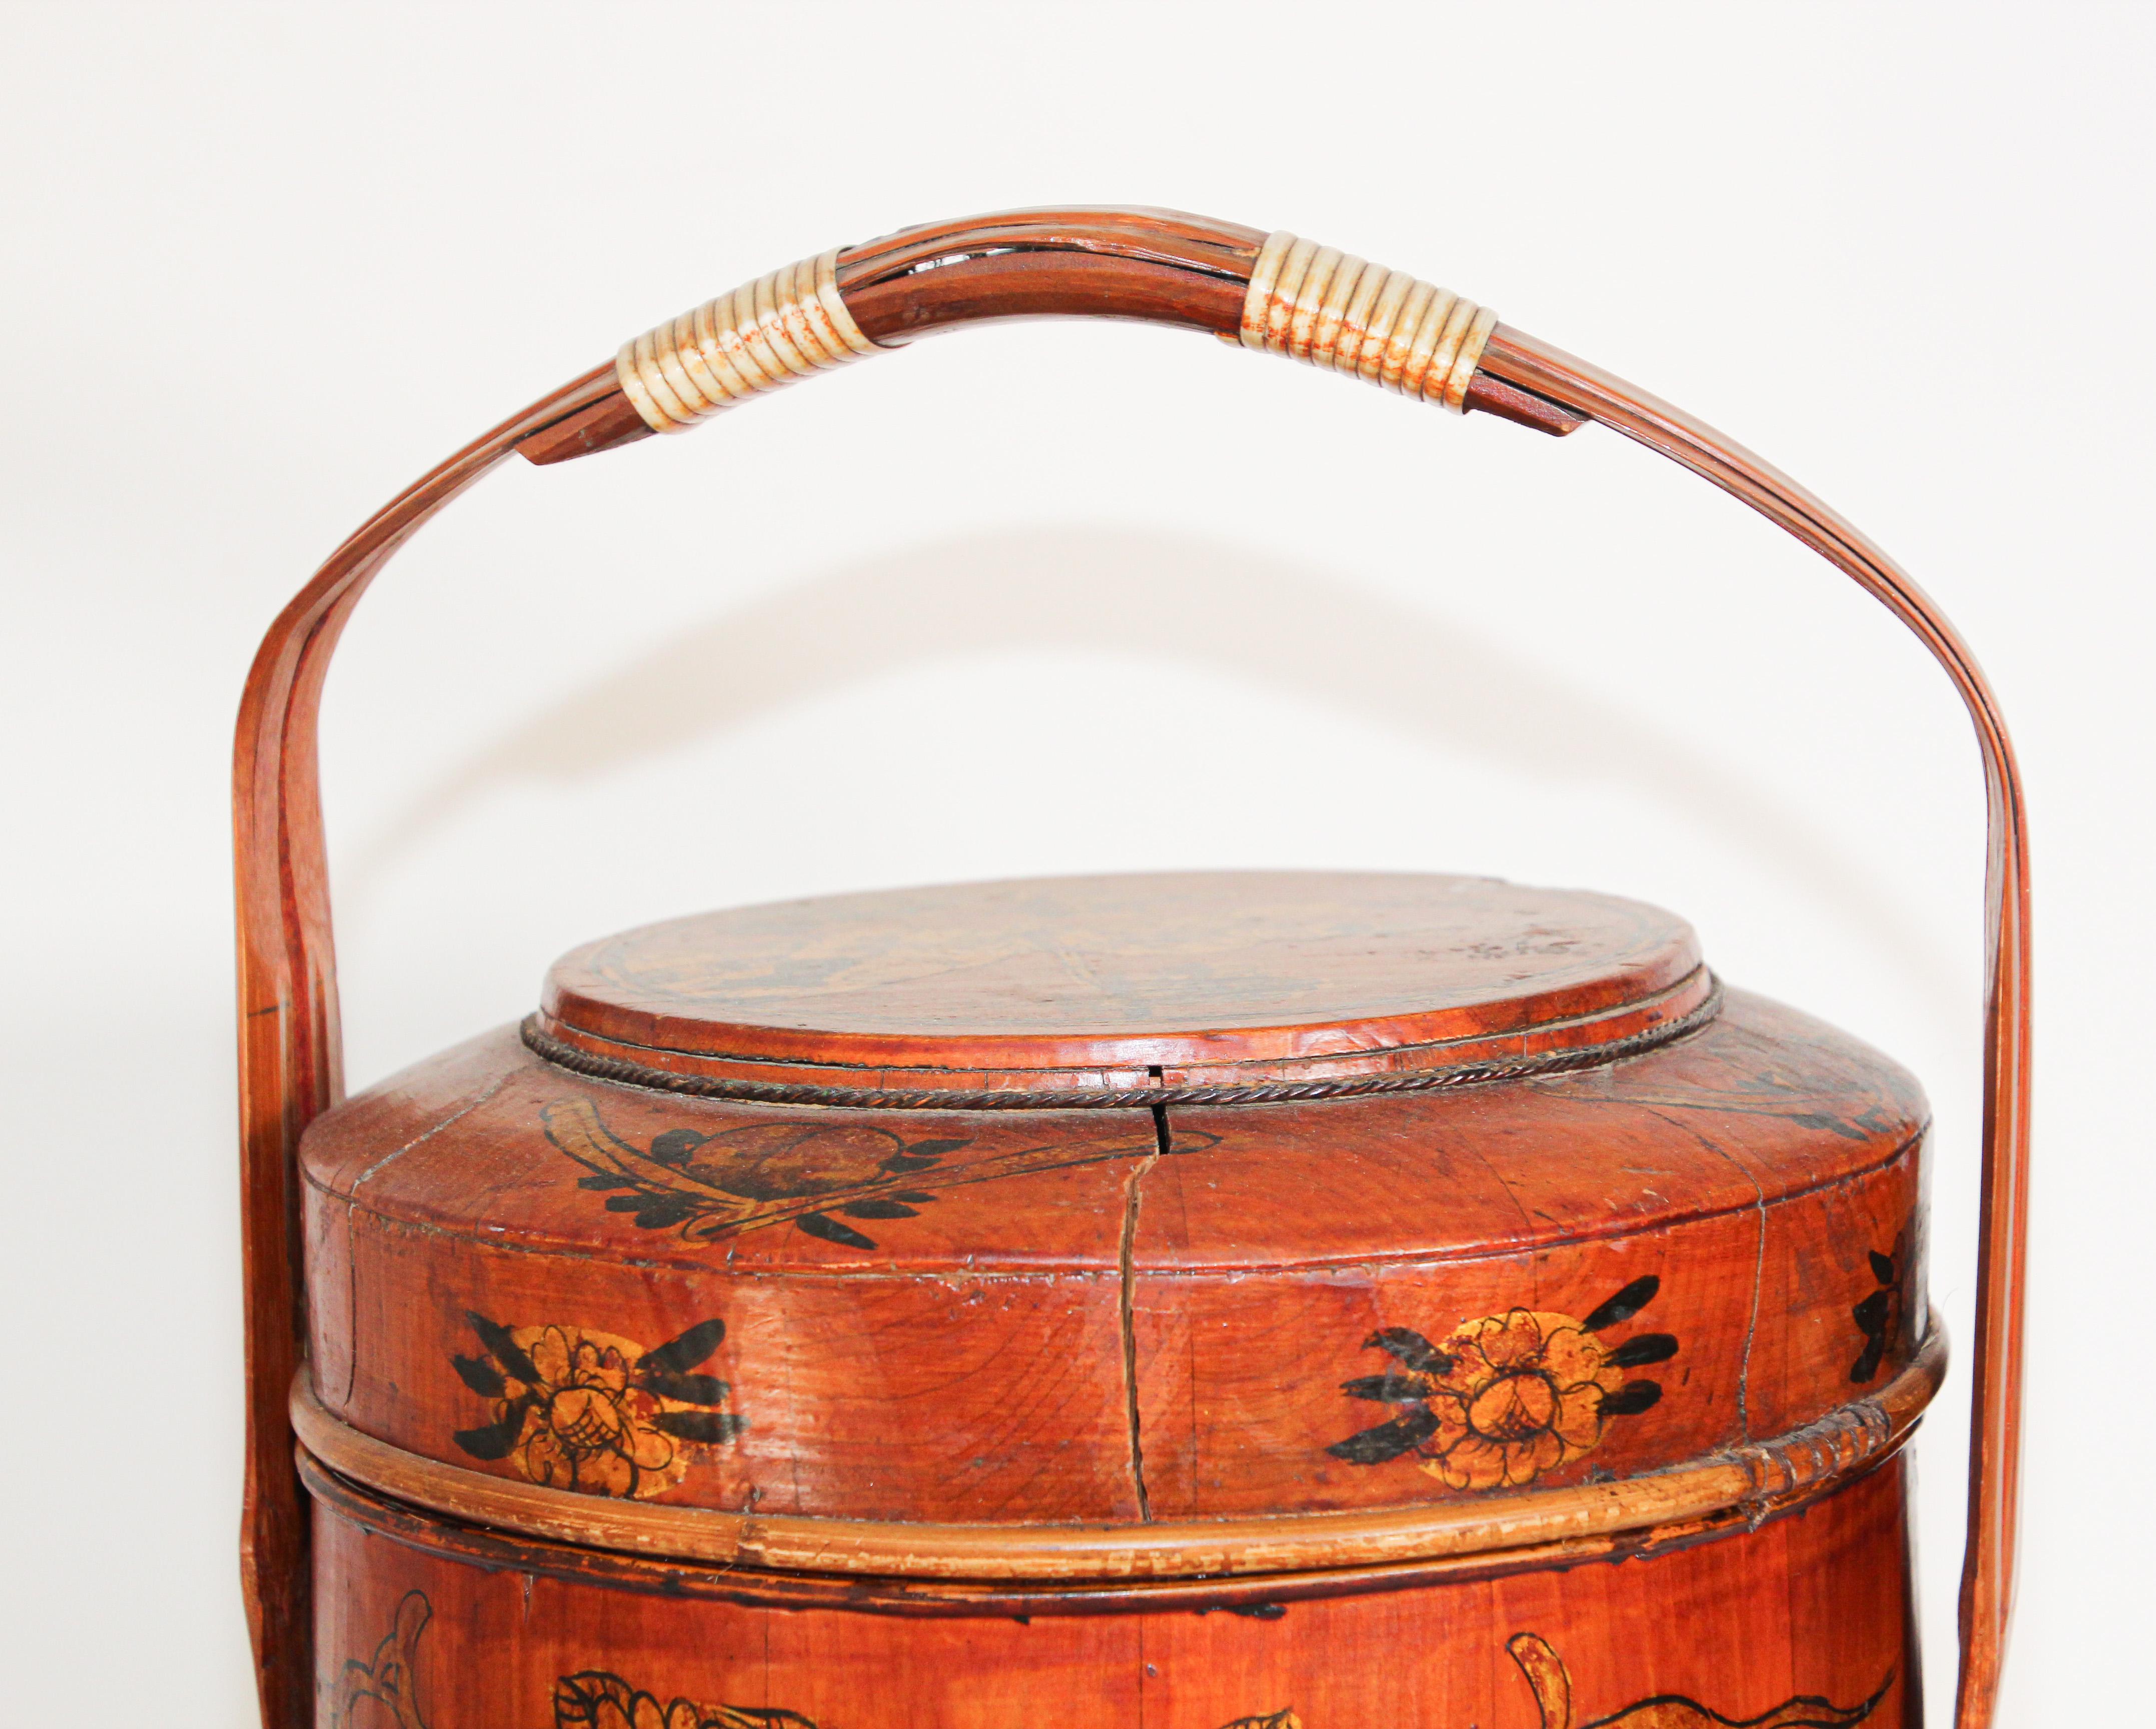 Late 19th century red lacquer Asian wedding Basket
Lidded two-tiered Chinese treen basket with bamboo and treen carrying handle. 
Decorative Chinese basket often known as a marriage basket. 
Wonderful food caddy basket with two compartments, hand